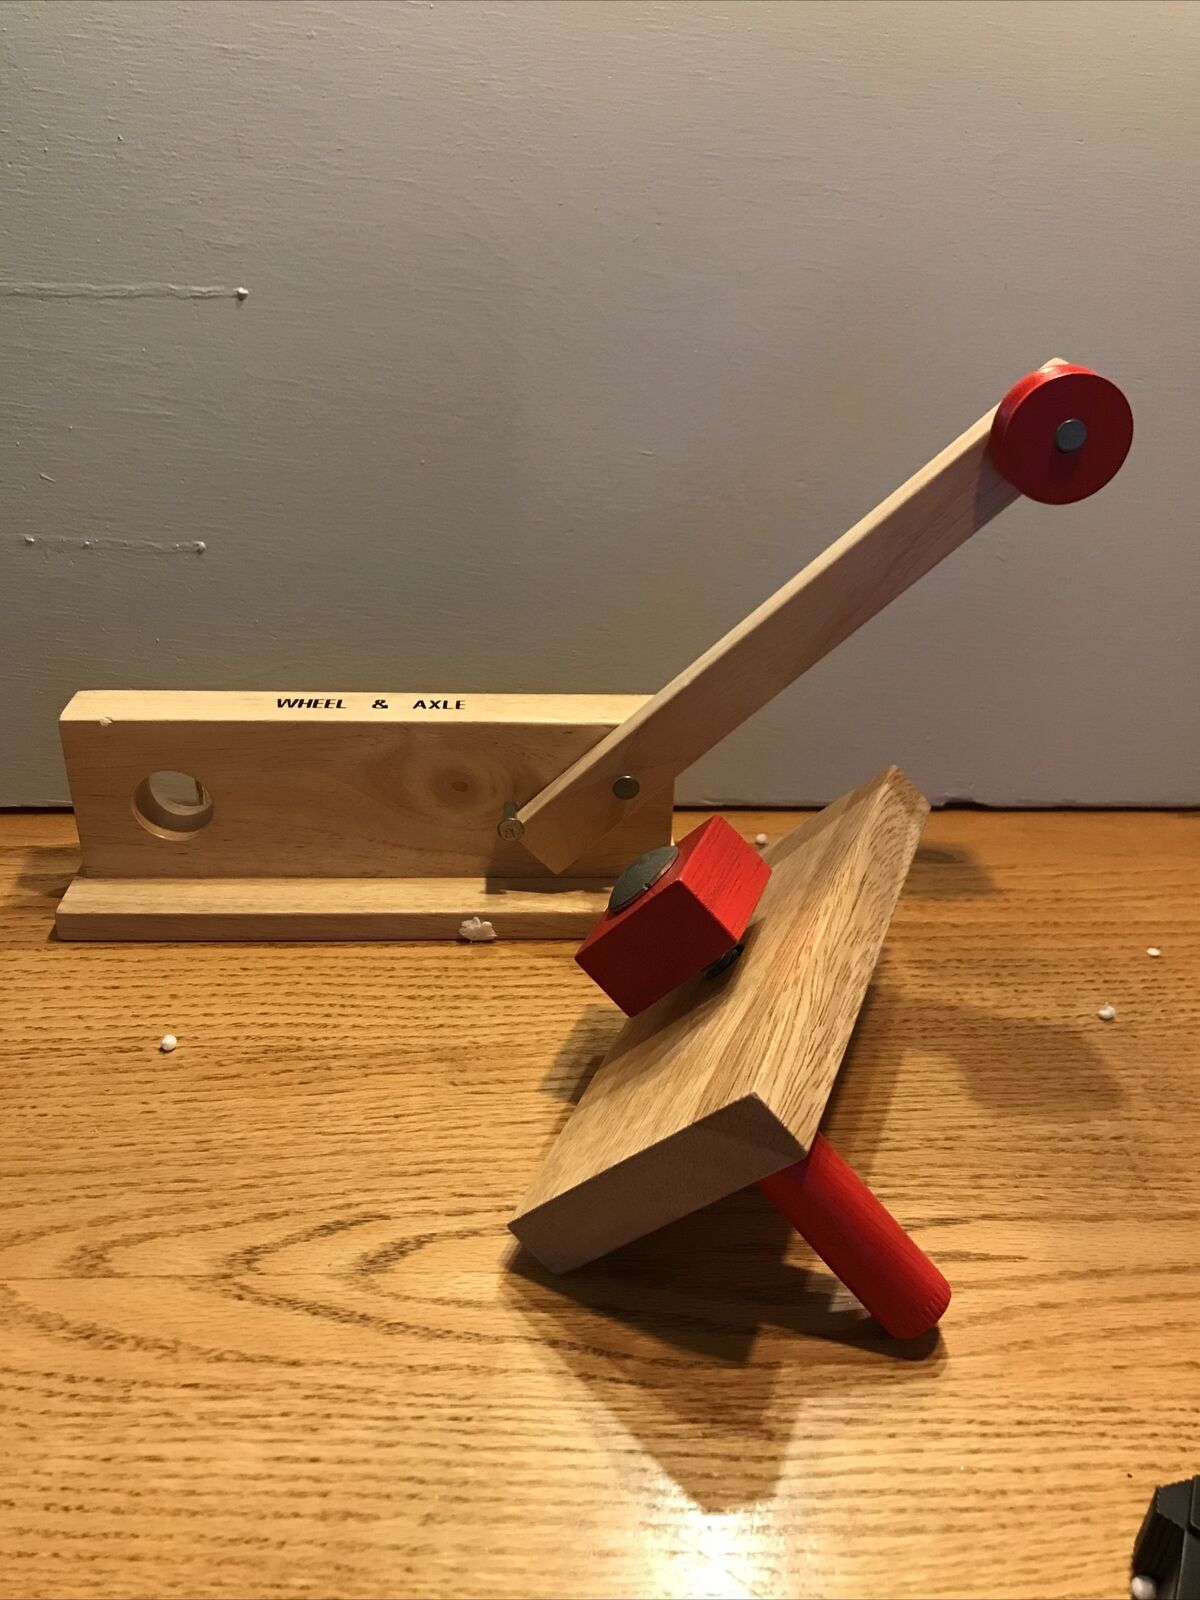 Simple Wheel And Axle Crane Model Demonstrates Physics And Science Pieces Plus